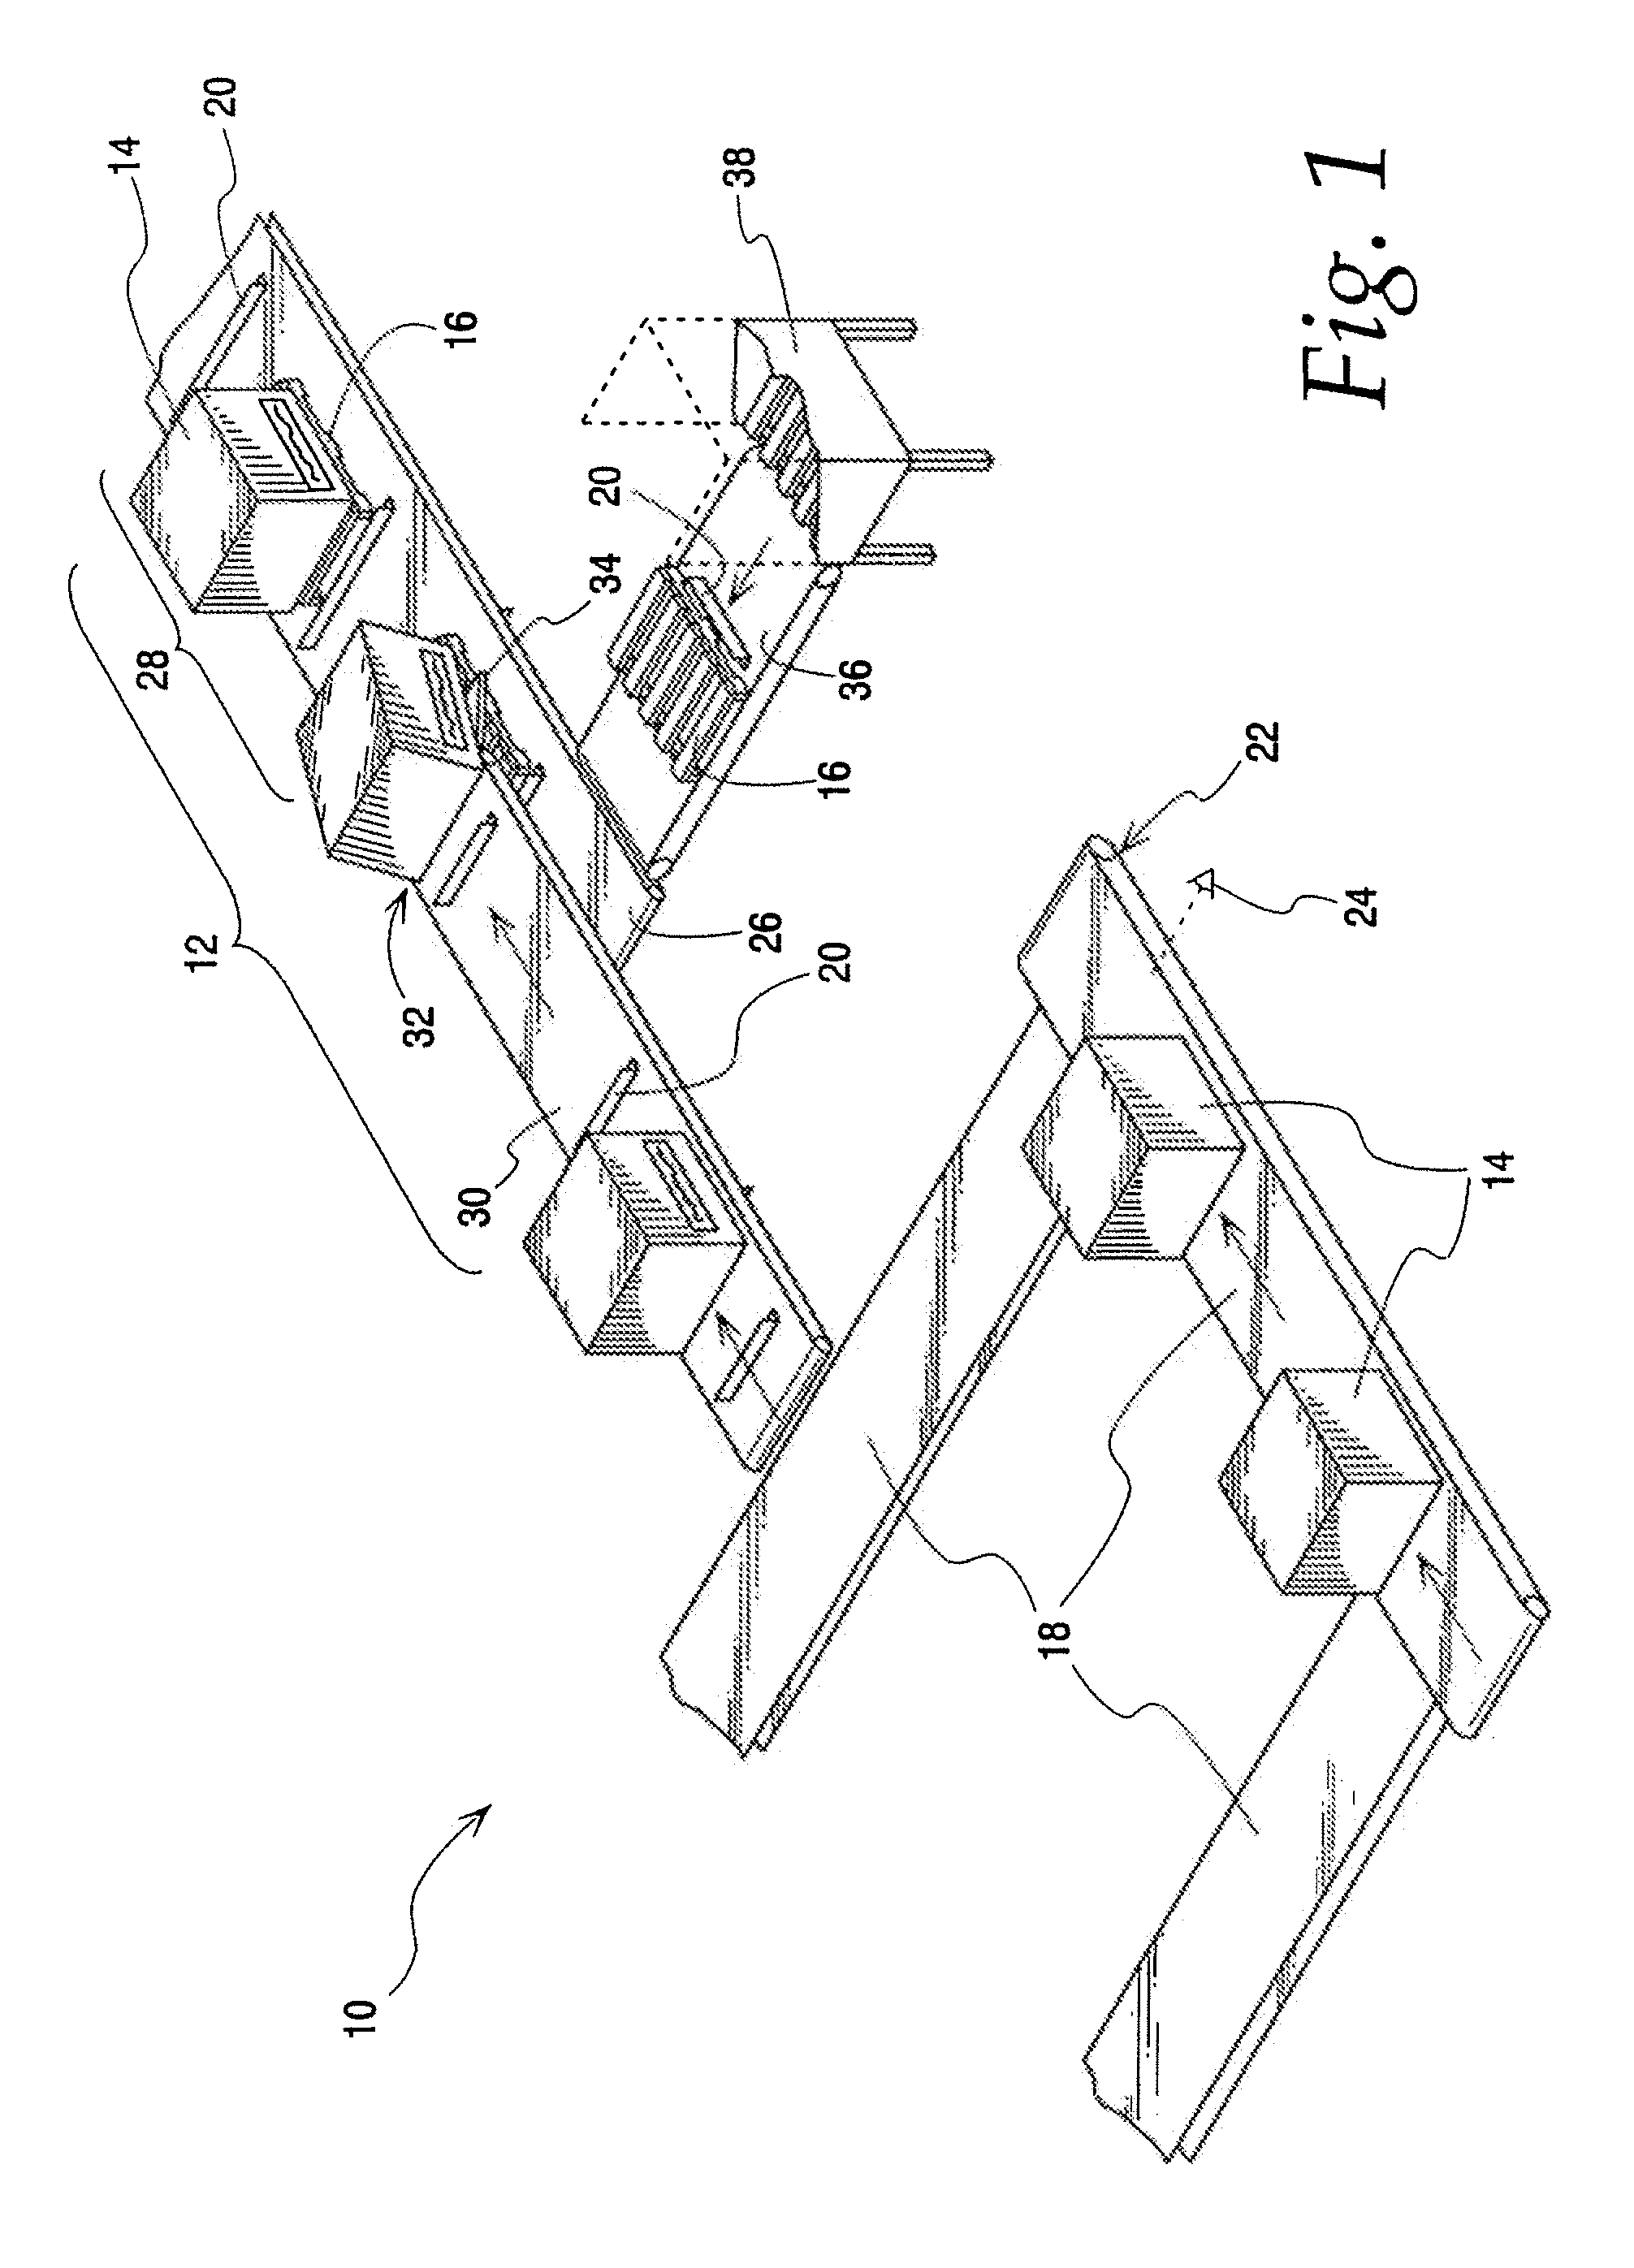 Automatic pallet loader system and method